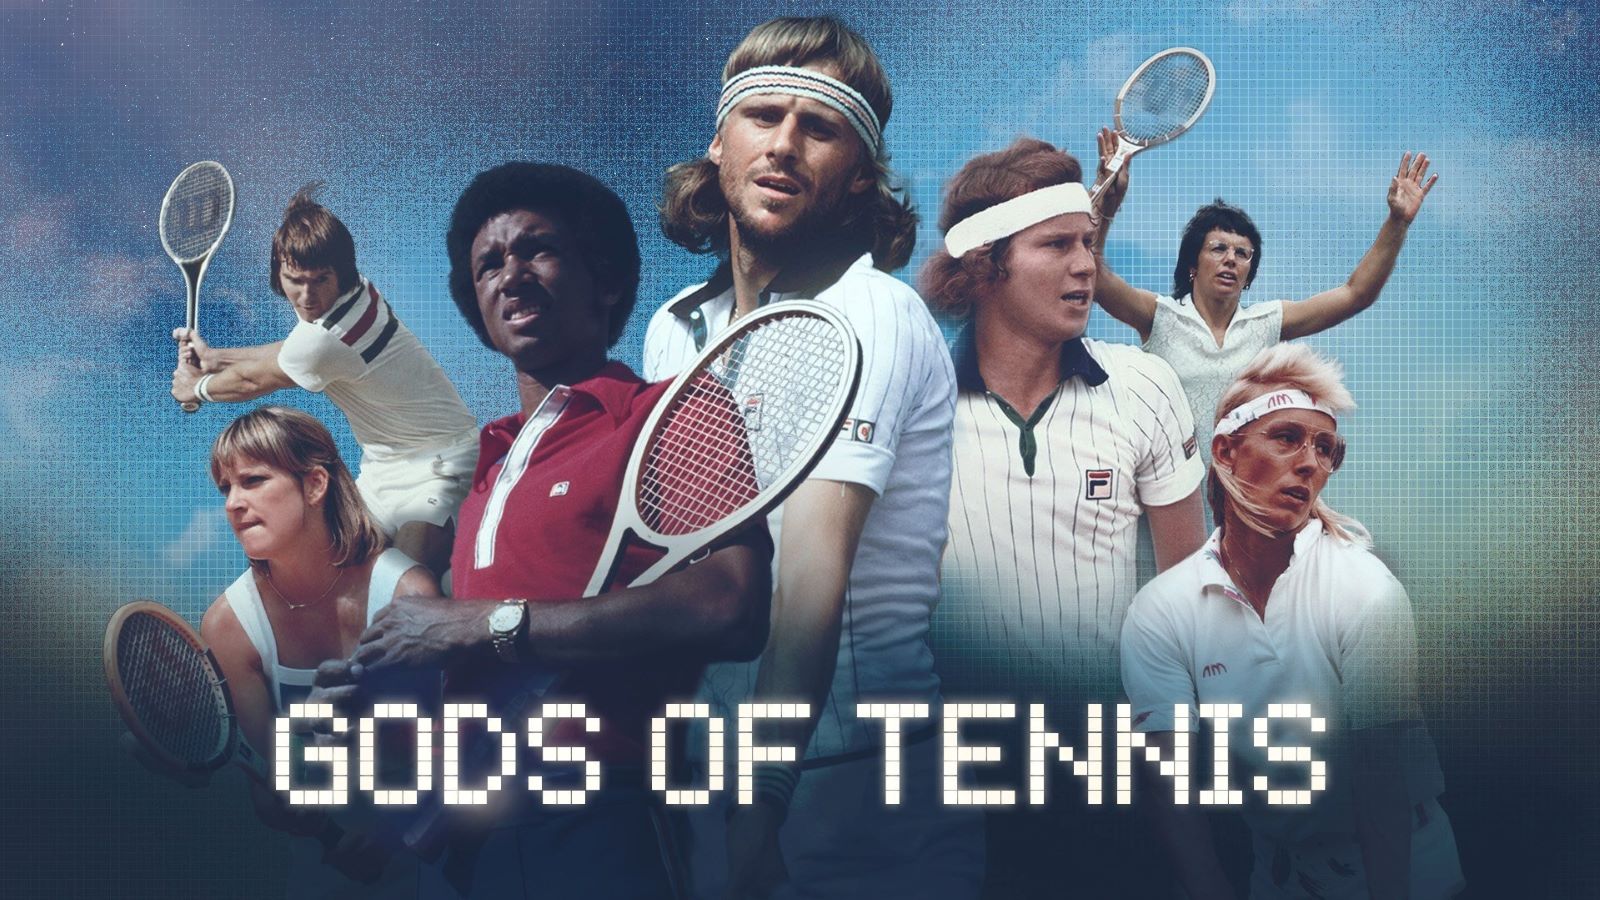 How to Watch Gods Of Tennis Online Free Stream the Tennis Docuseries from Anywhere